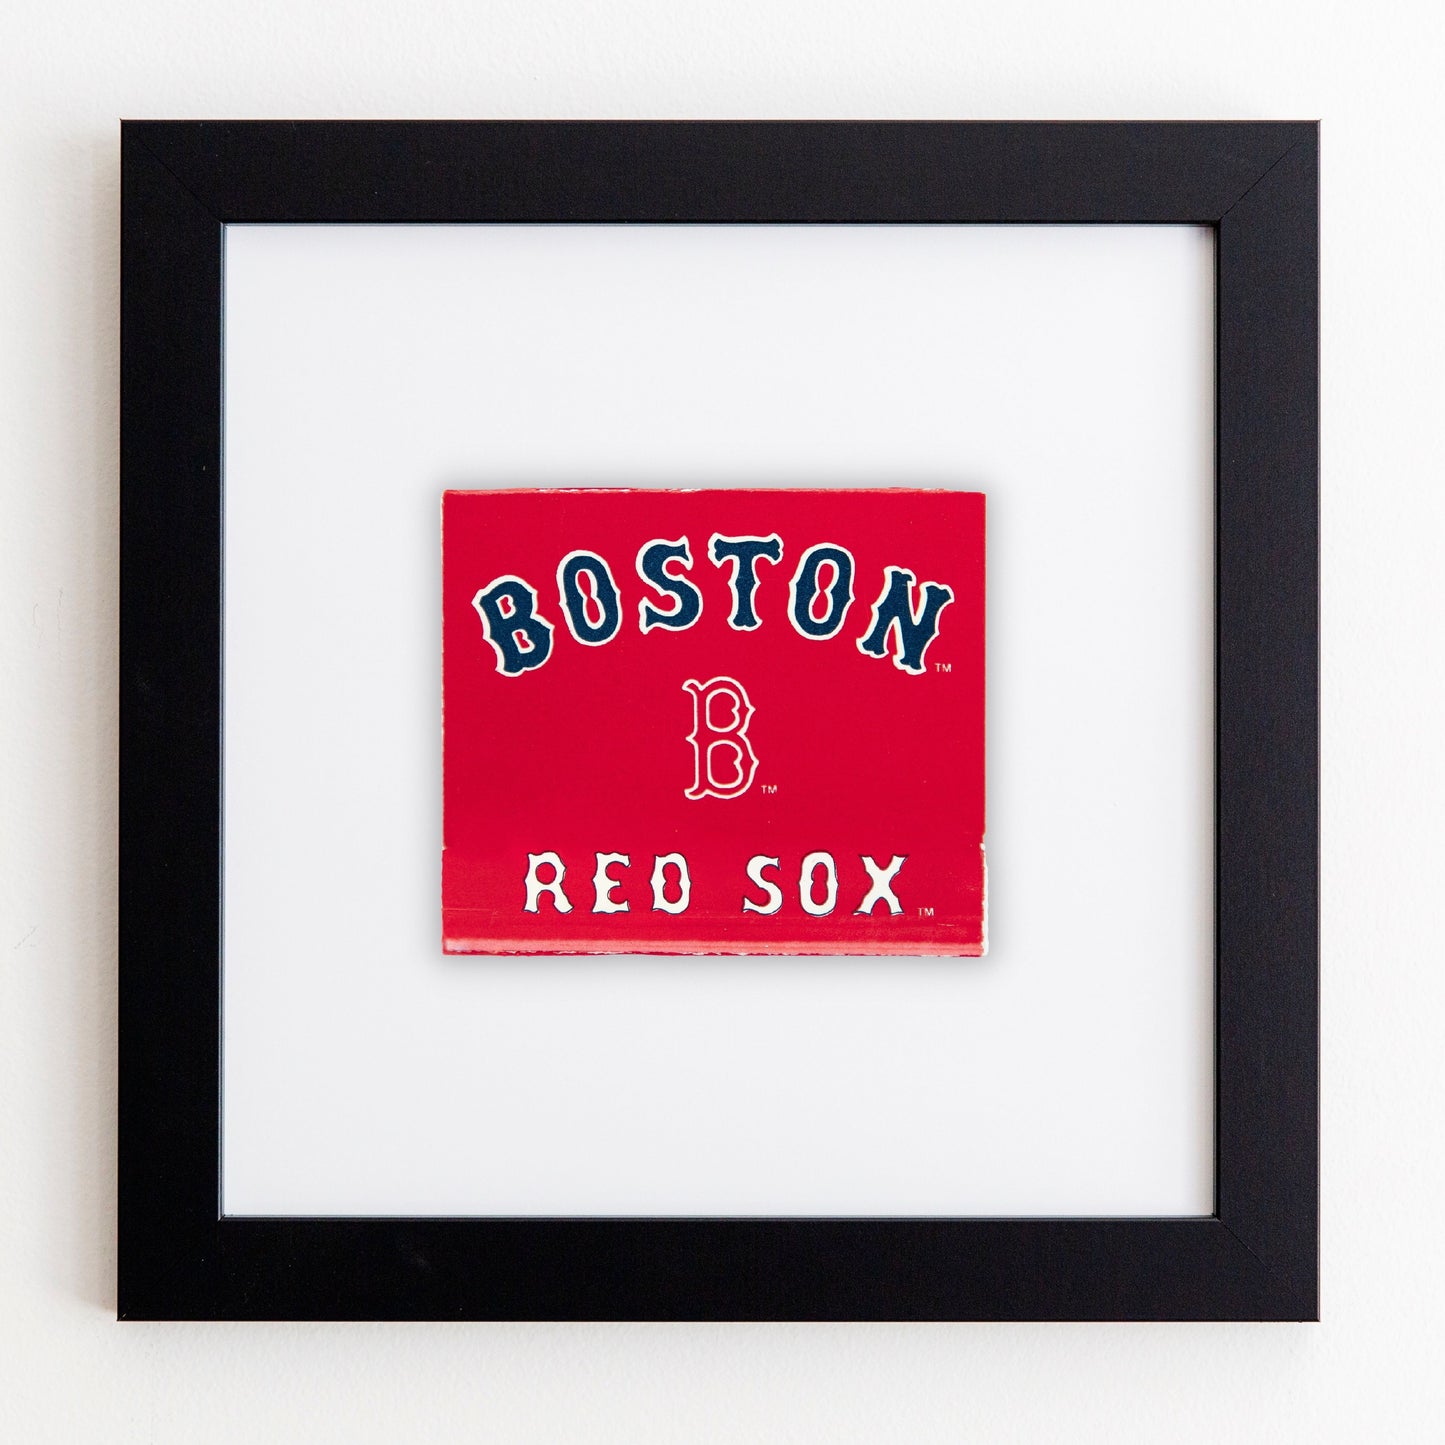 Boston Red Sox (front)